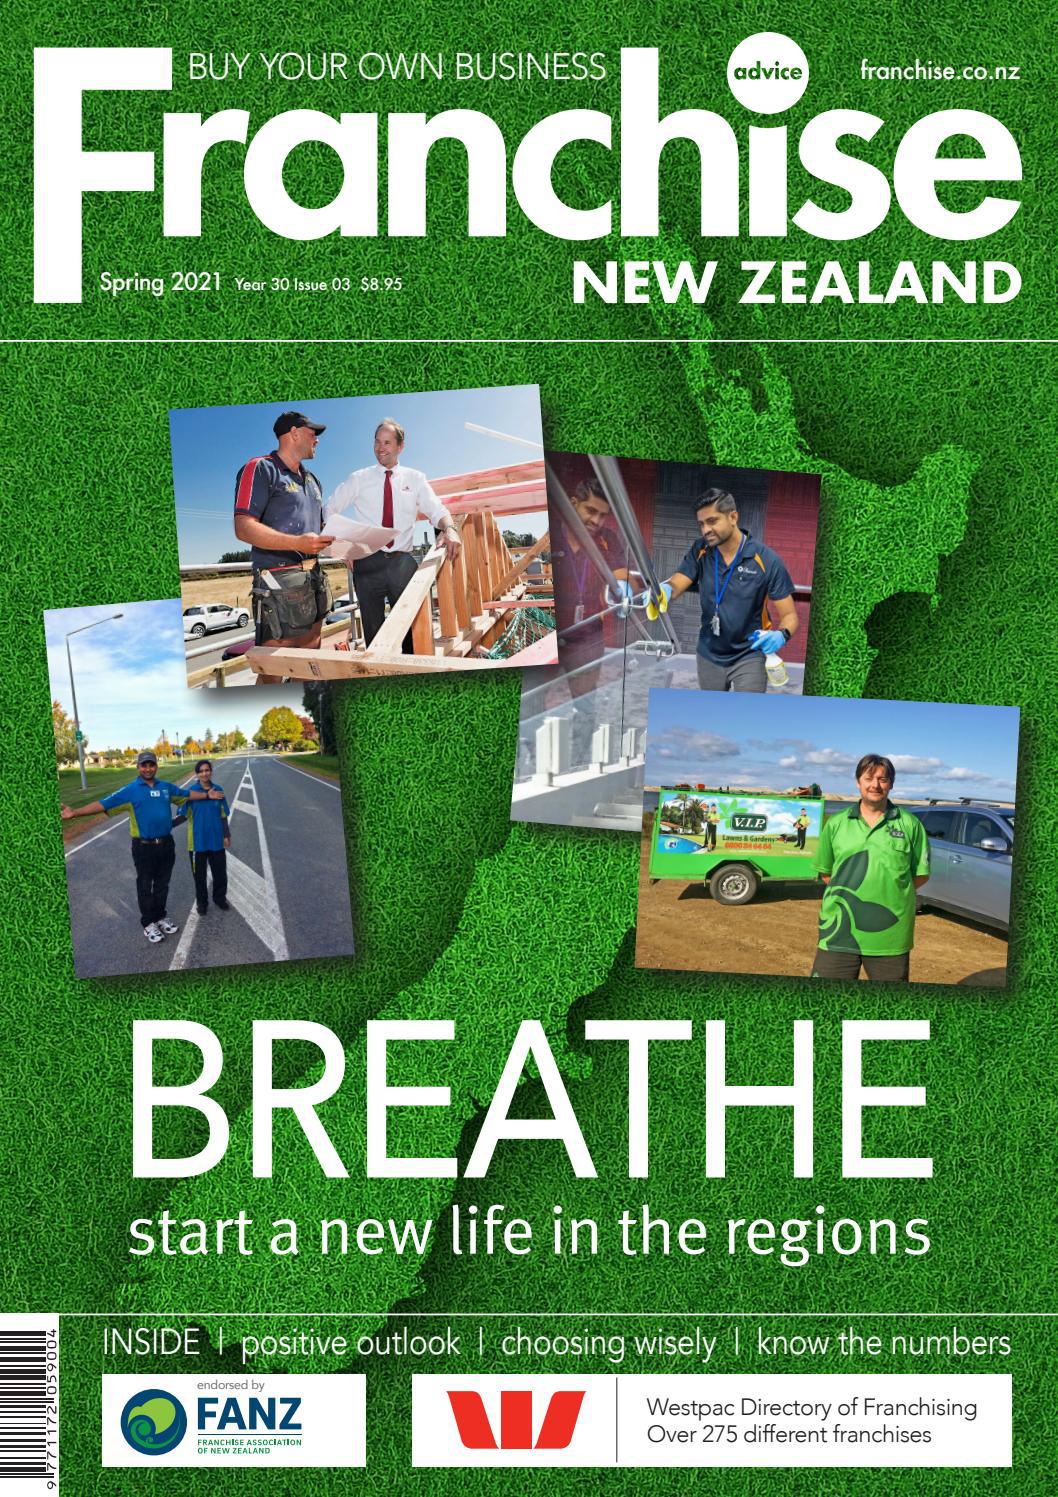 Franchise New Zealand - Year 30 Issue 03 – Spring 2021